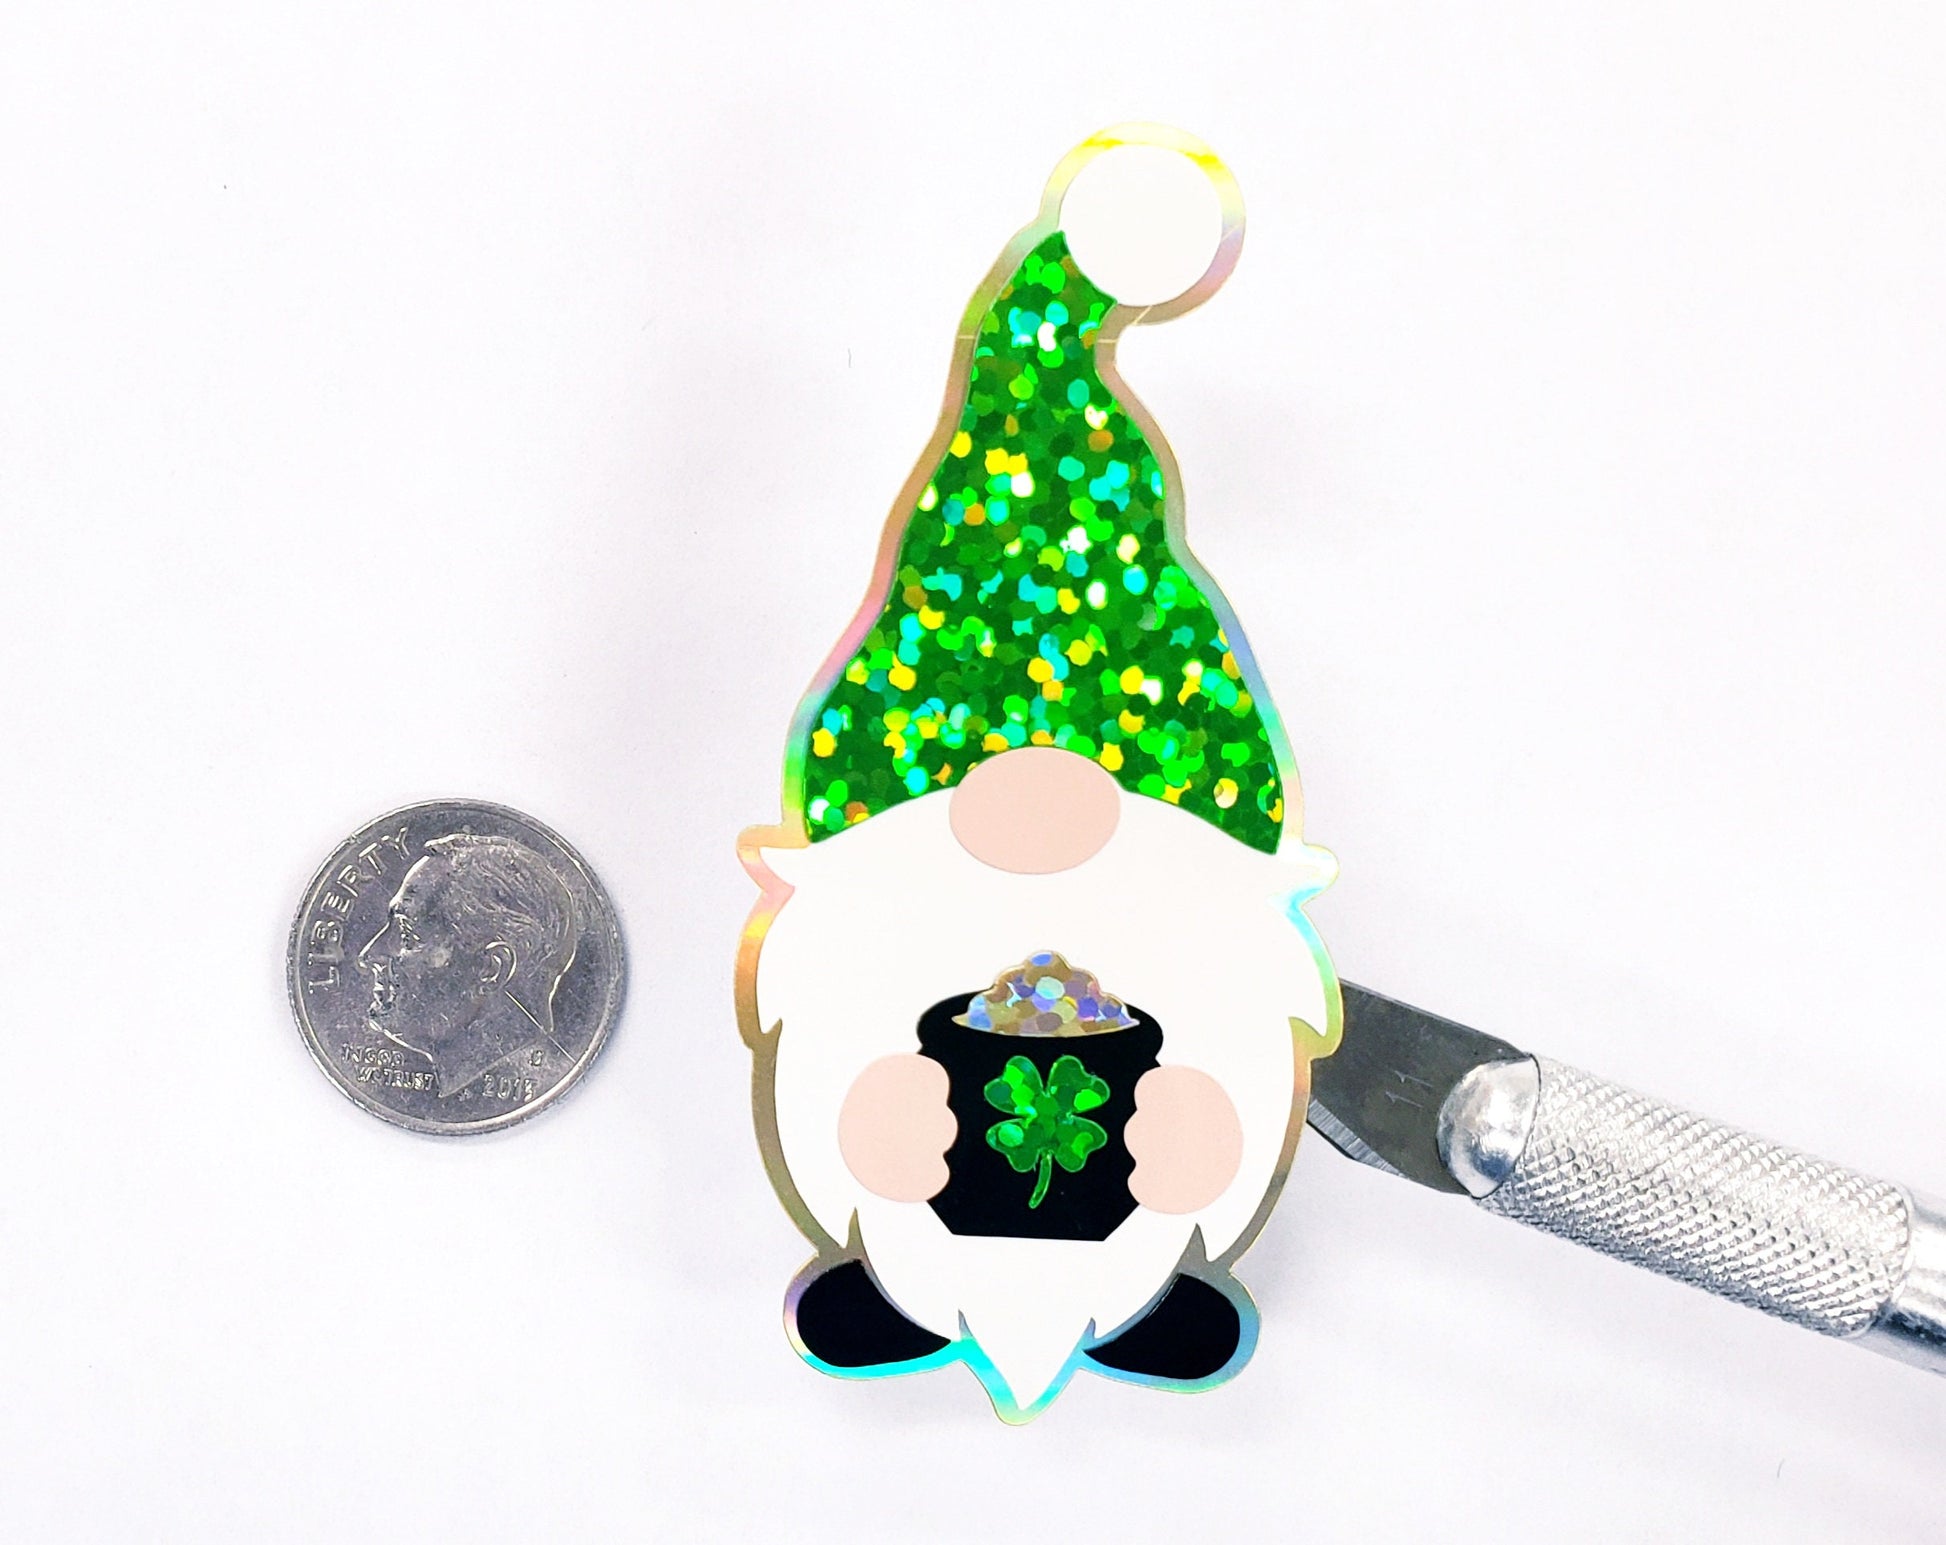 Gnome Sticker set, green and white lucky gnome vinyl decal, sparkly pot of gold sticker for St. Patrick's Day cards, notebooks & laptops